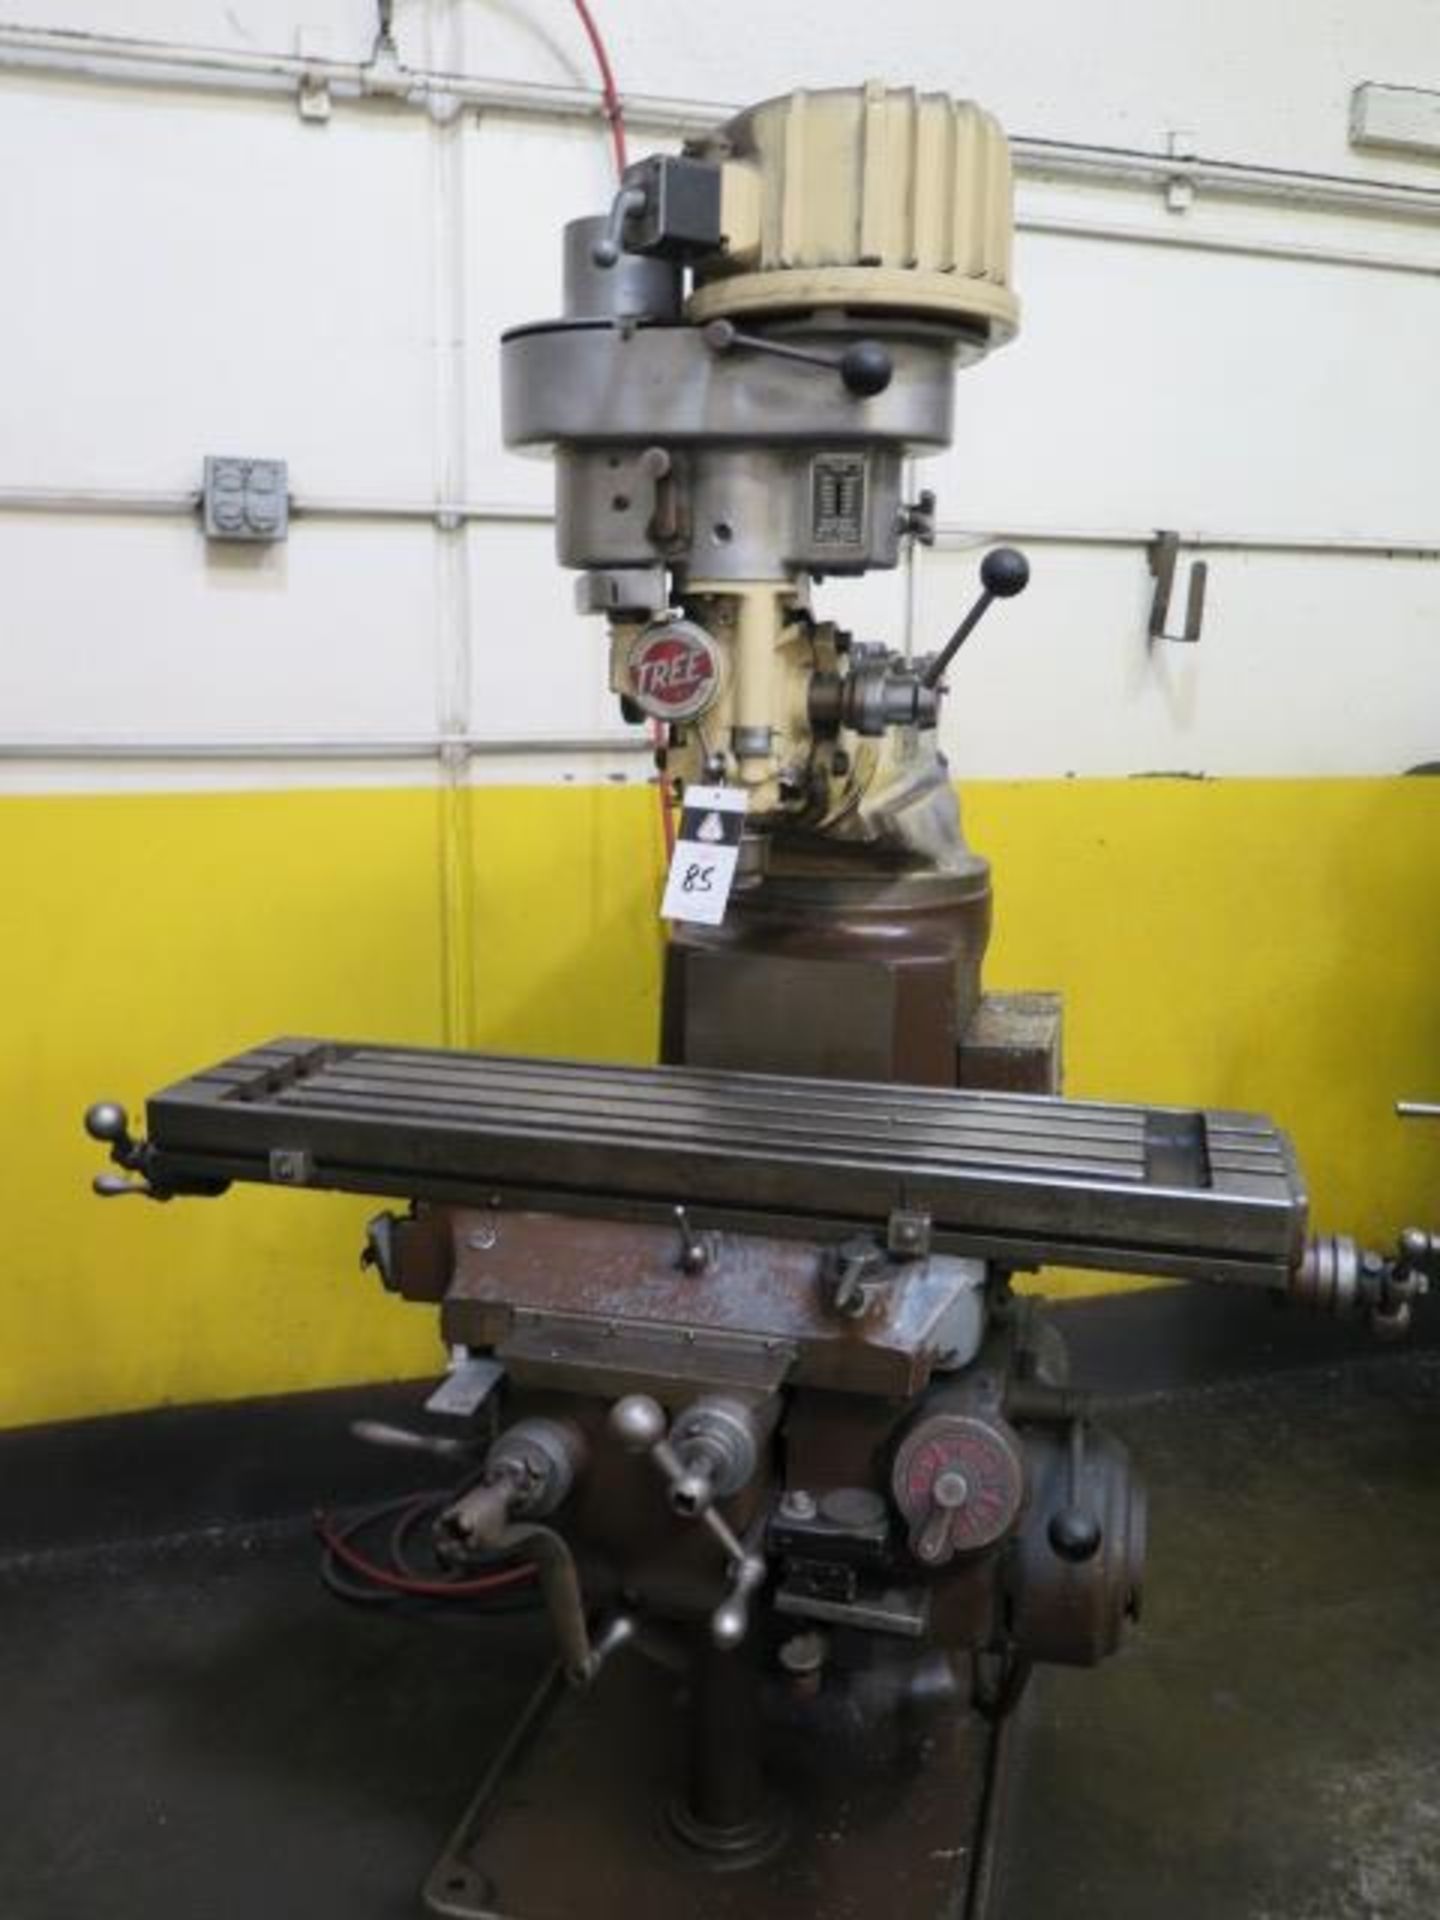 Tree 2UVR Vertical Mill s/n 7989 w/ 60-3300 RPM, Colleted Spindle, PF, 10 ½” x 42” Table, SOLD AS IS - Image 2 of 9